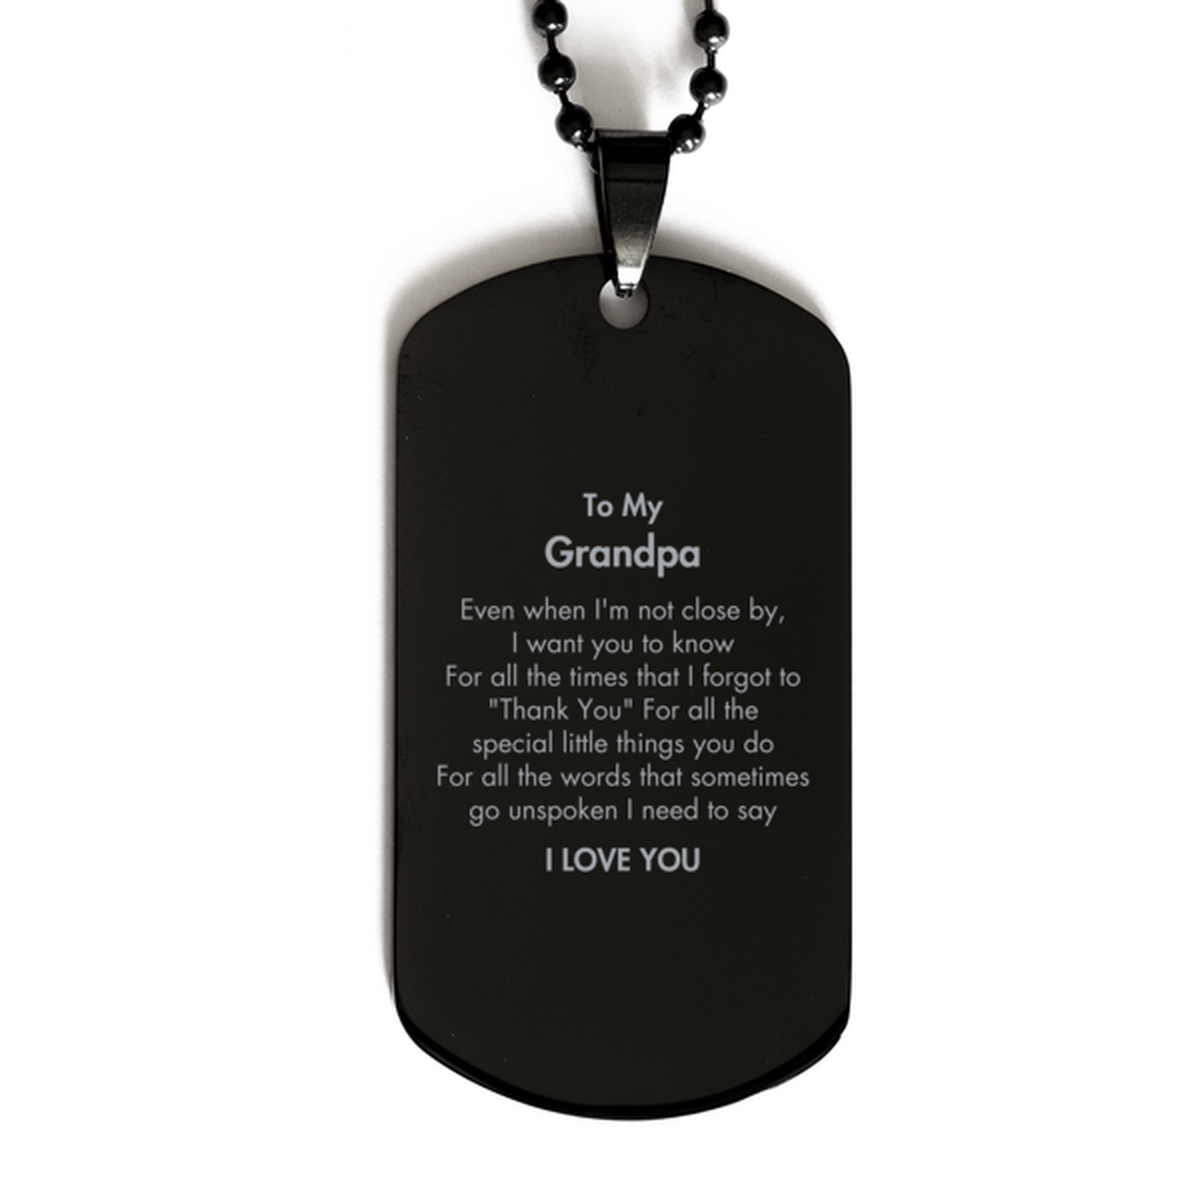 Thank You Gifts for Grandpa, Keepsake Black Dog Tag Gifts for Grandpa Birthday Mother's day Father's Day Grandpa For all the words That sometimes go unspoken I need to say I LOVE YOU